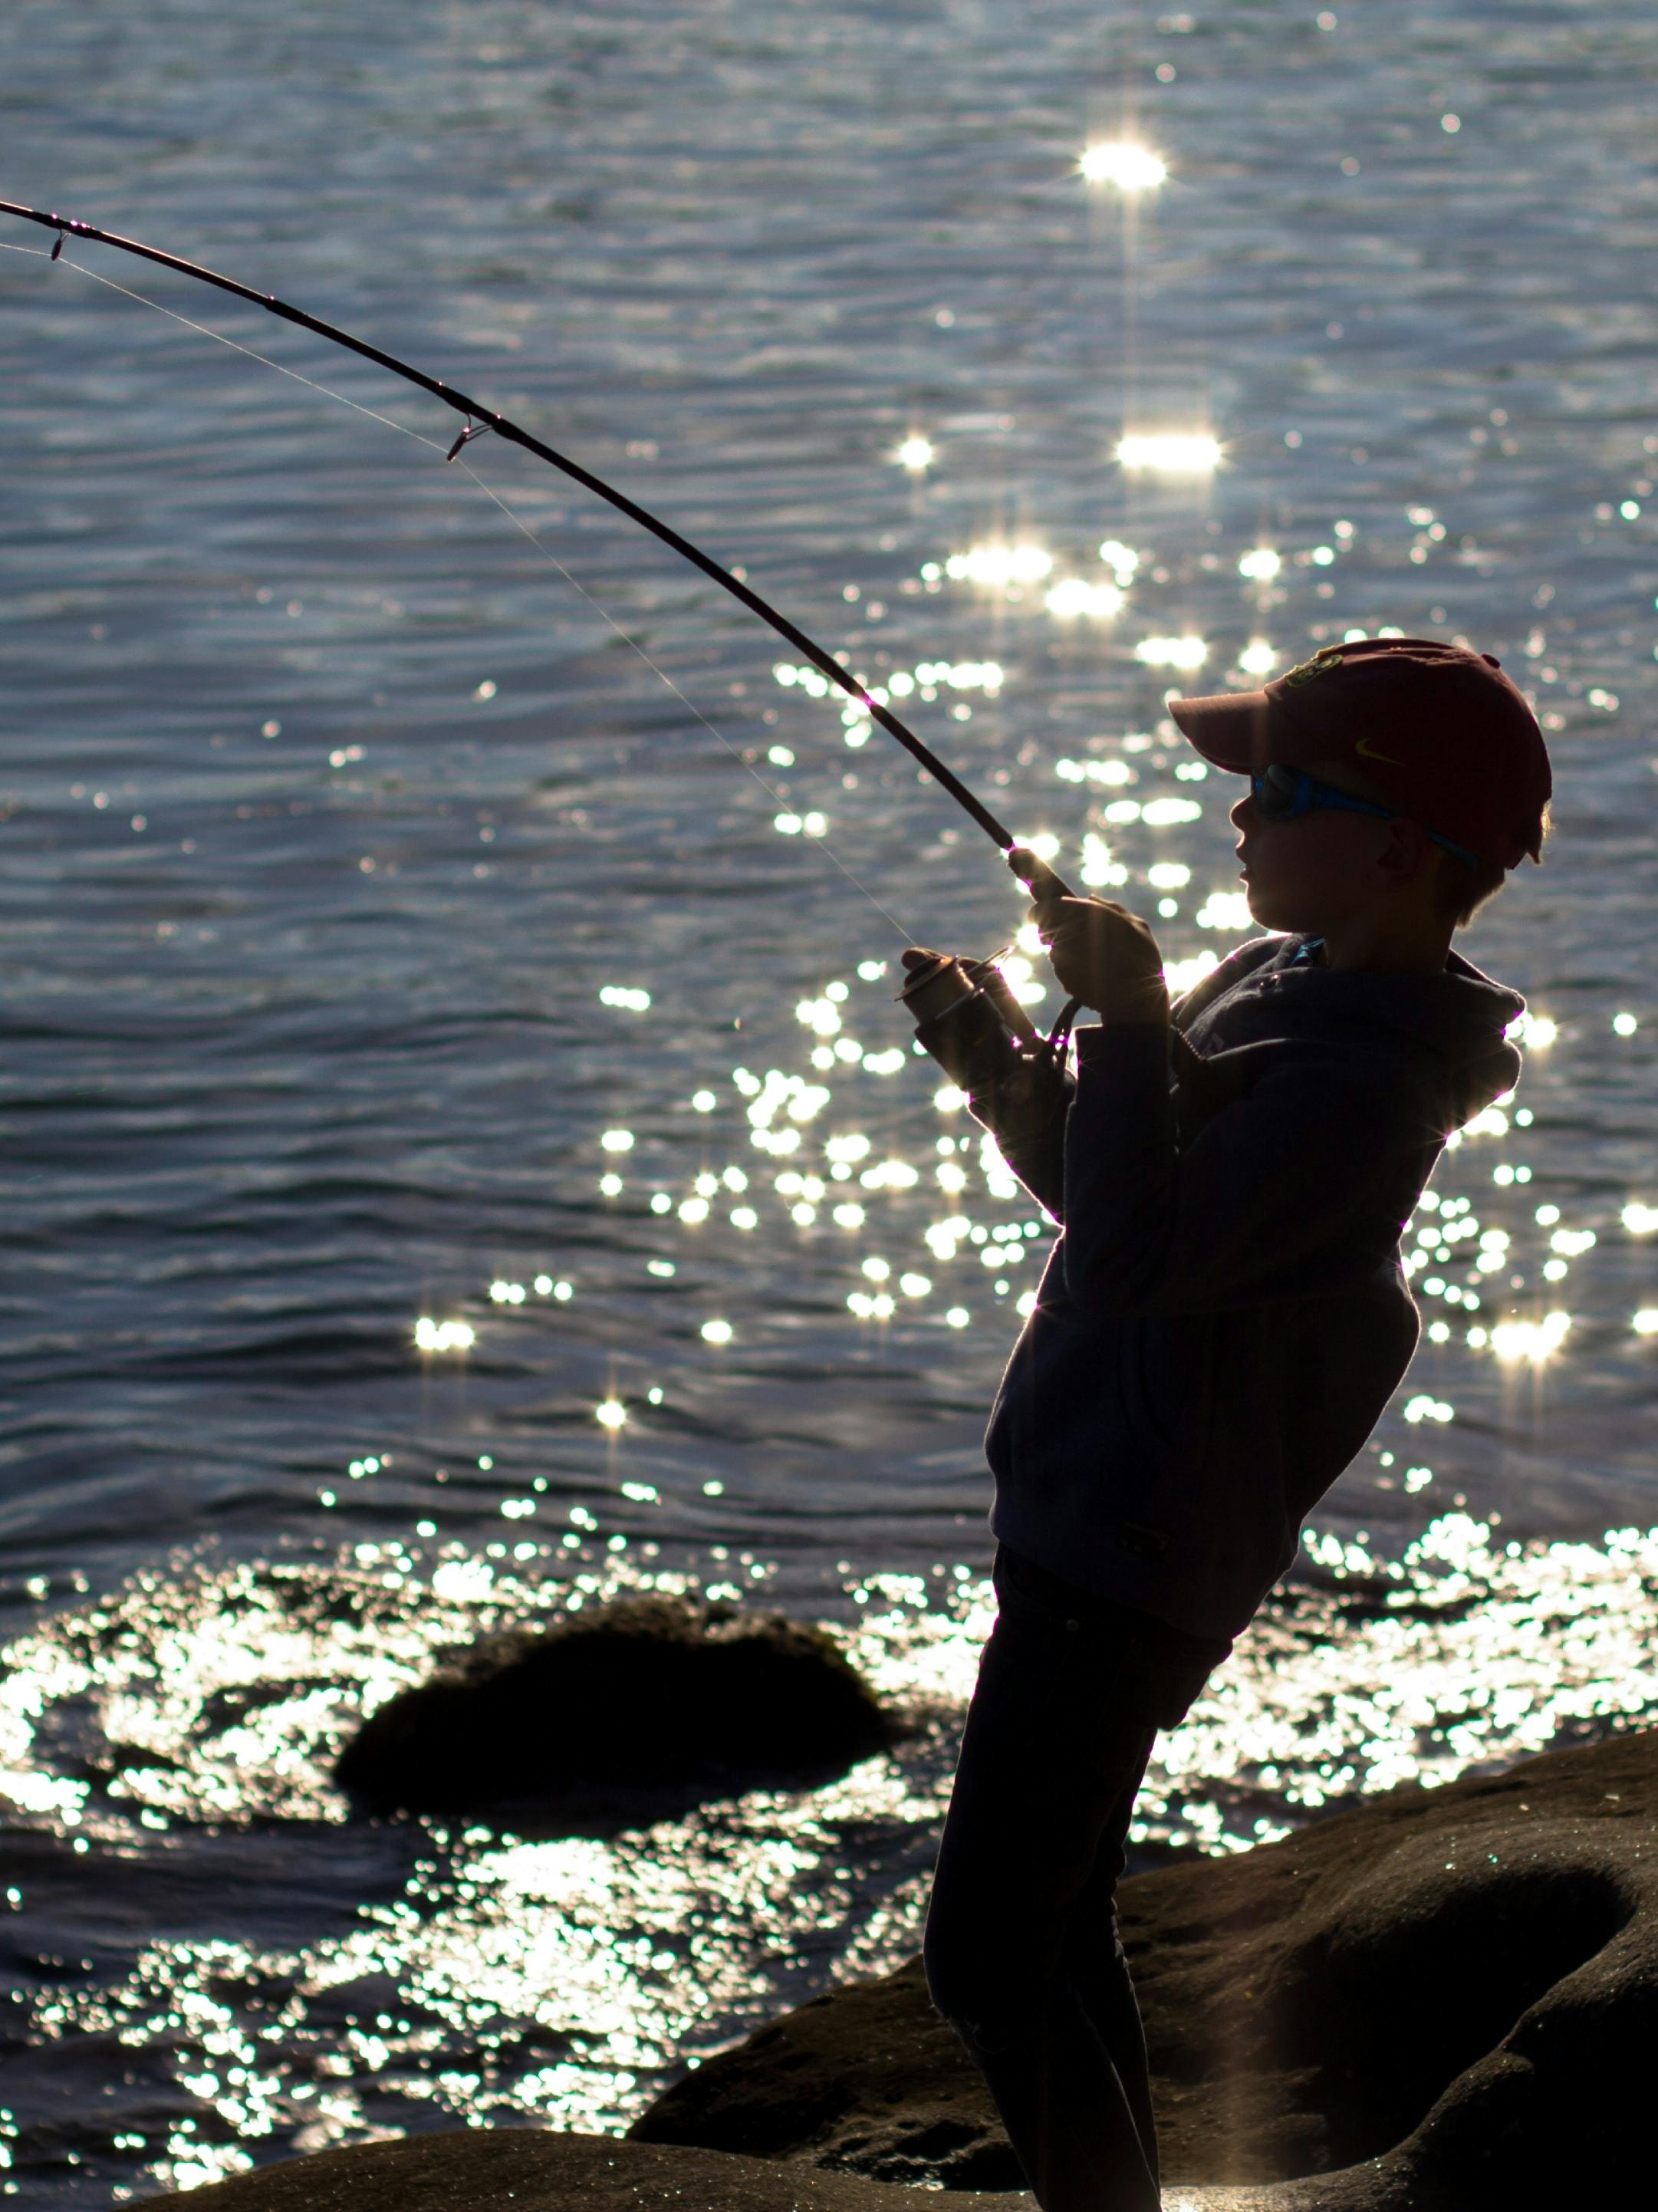 A silhouetted child stands on the banks of a sparking water source, leaning back against a curving fishing rod. 